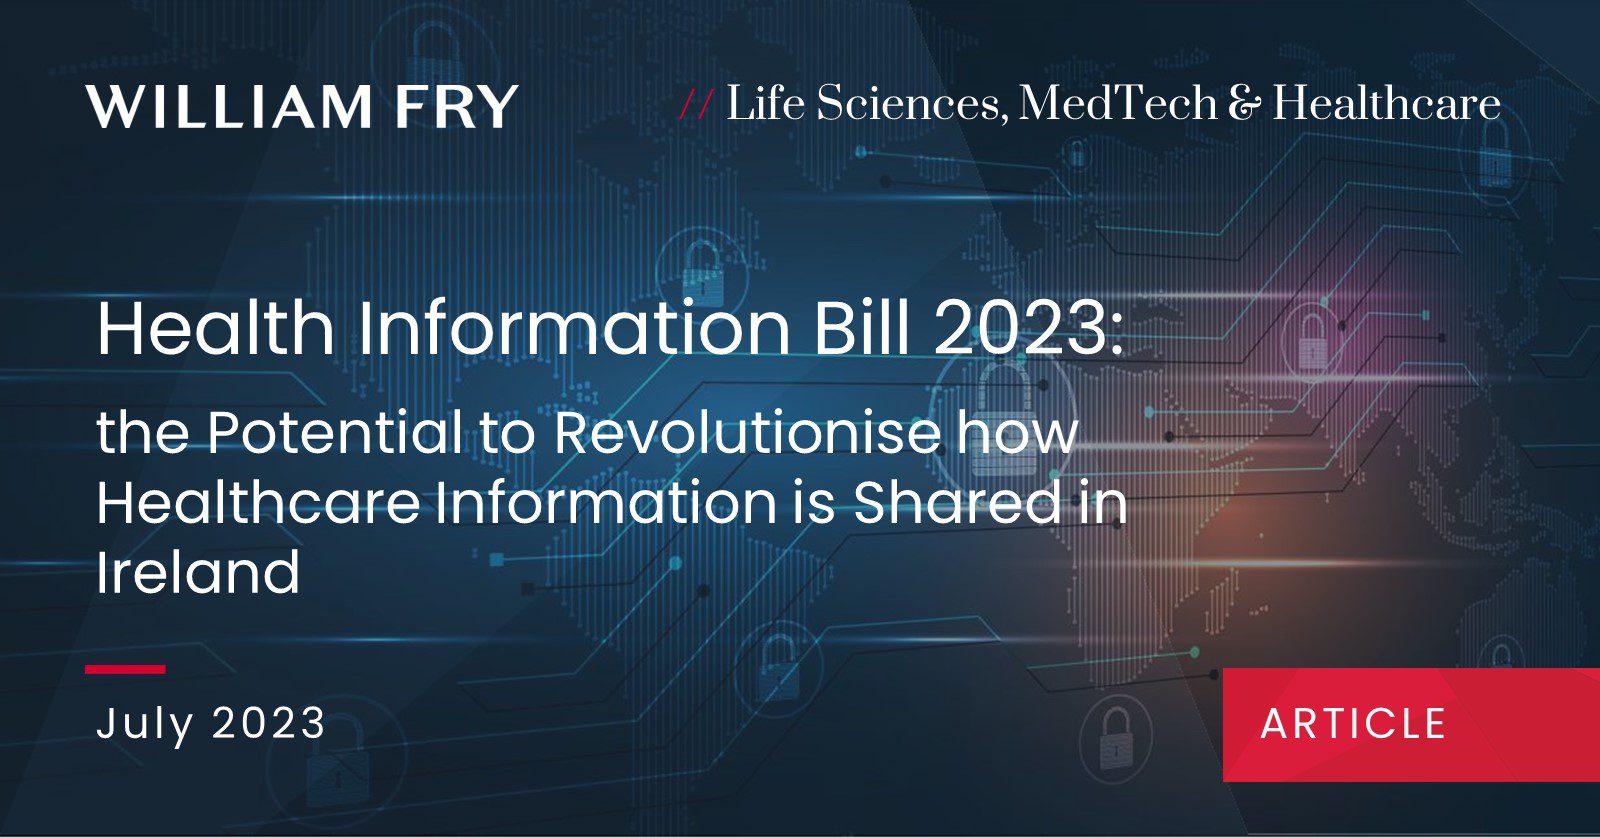 Health Information Bill 2023: the Potential to Revolutionise how Healthcare Information is Shared in Ireland